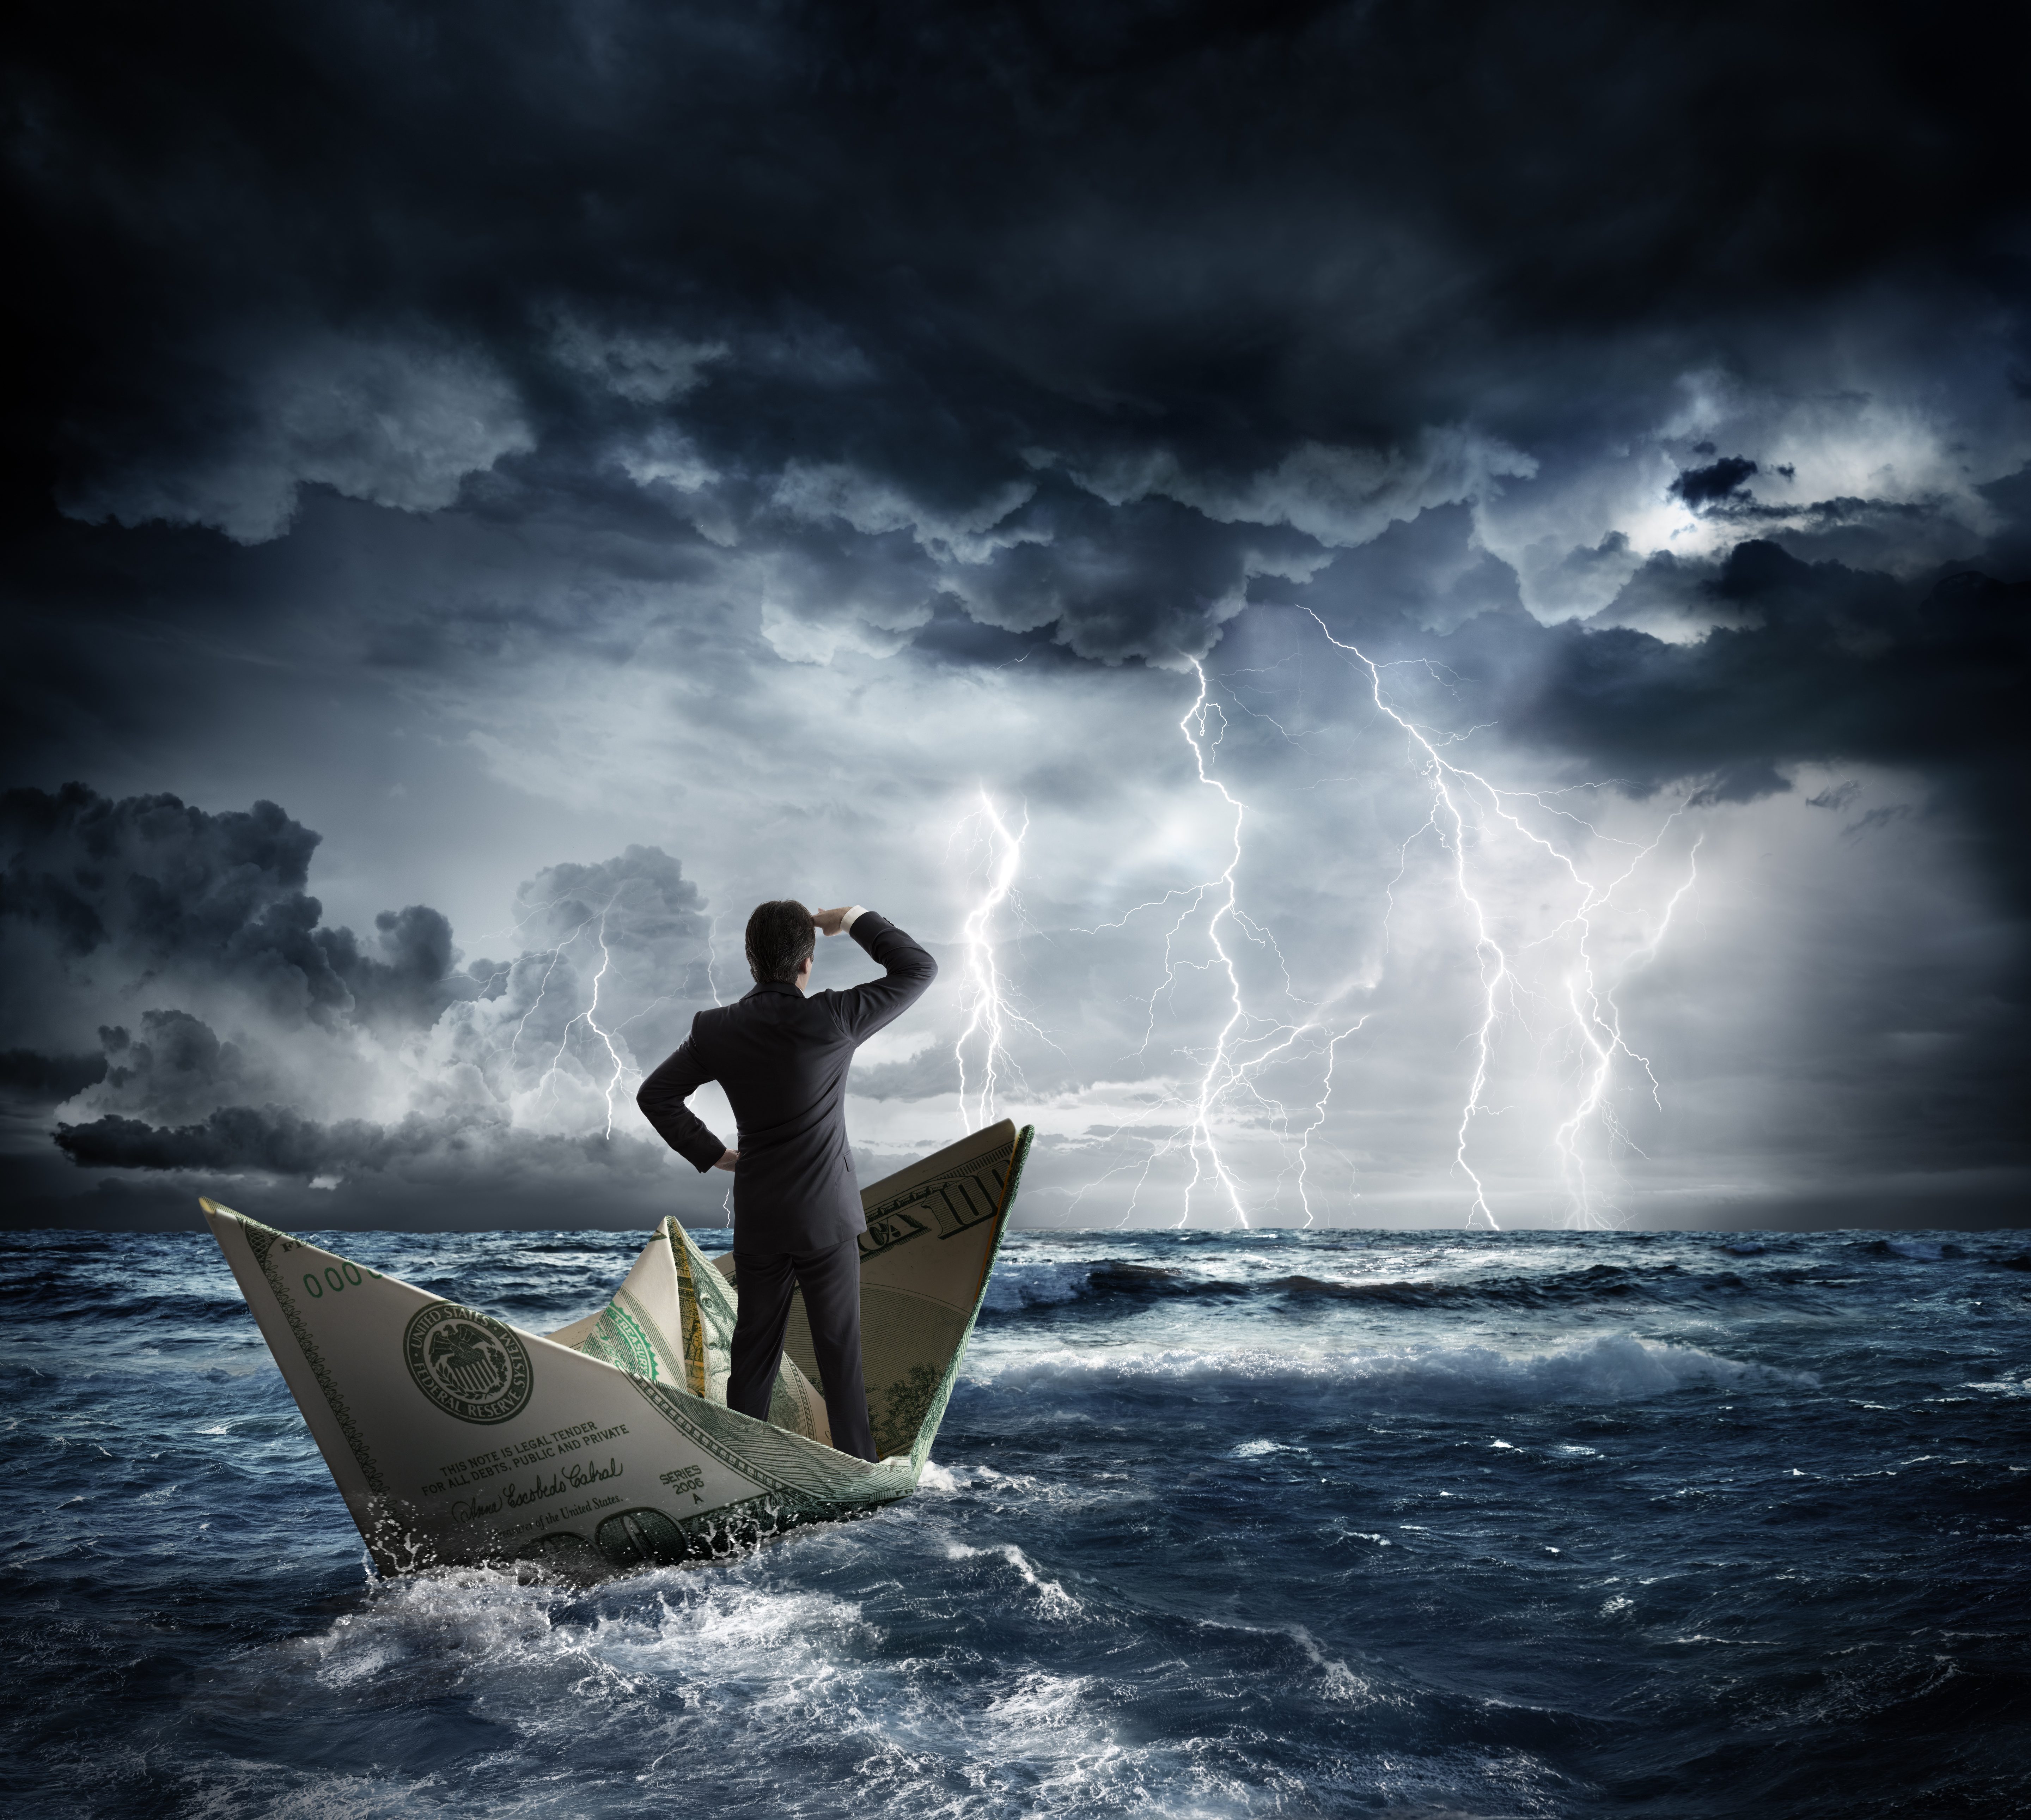 Photo-illustration: a person in a business suit stands in a boat made of a folded $100 bill, surveying lightning, thunderclouds, and rough seas ahead.